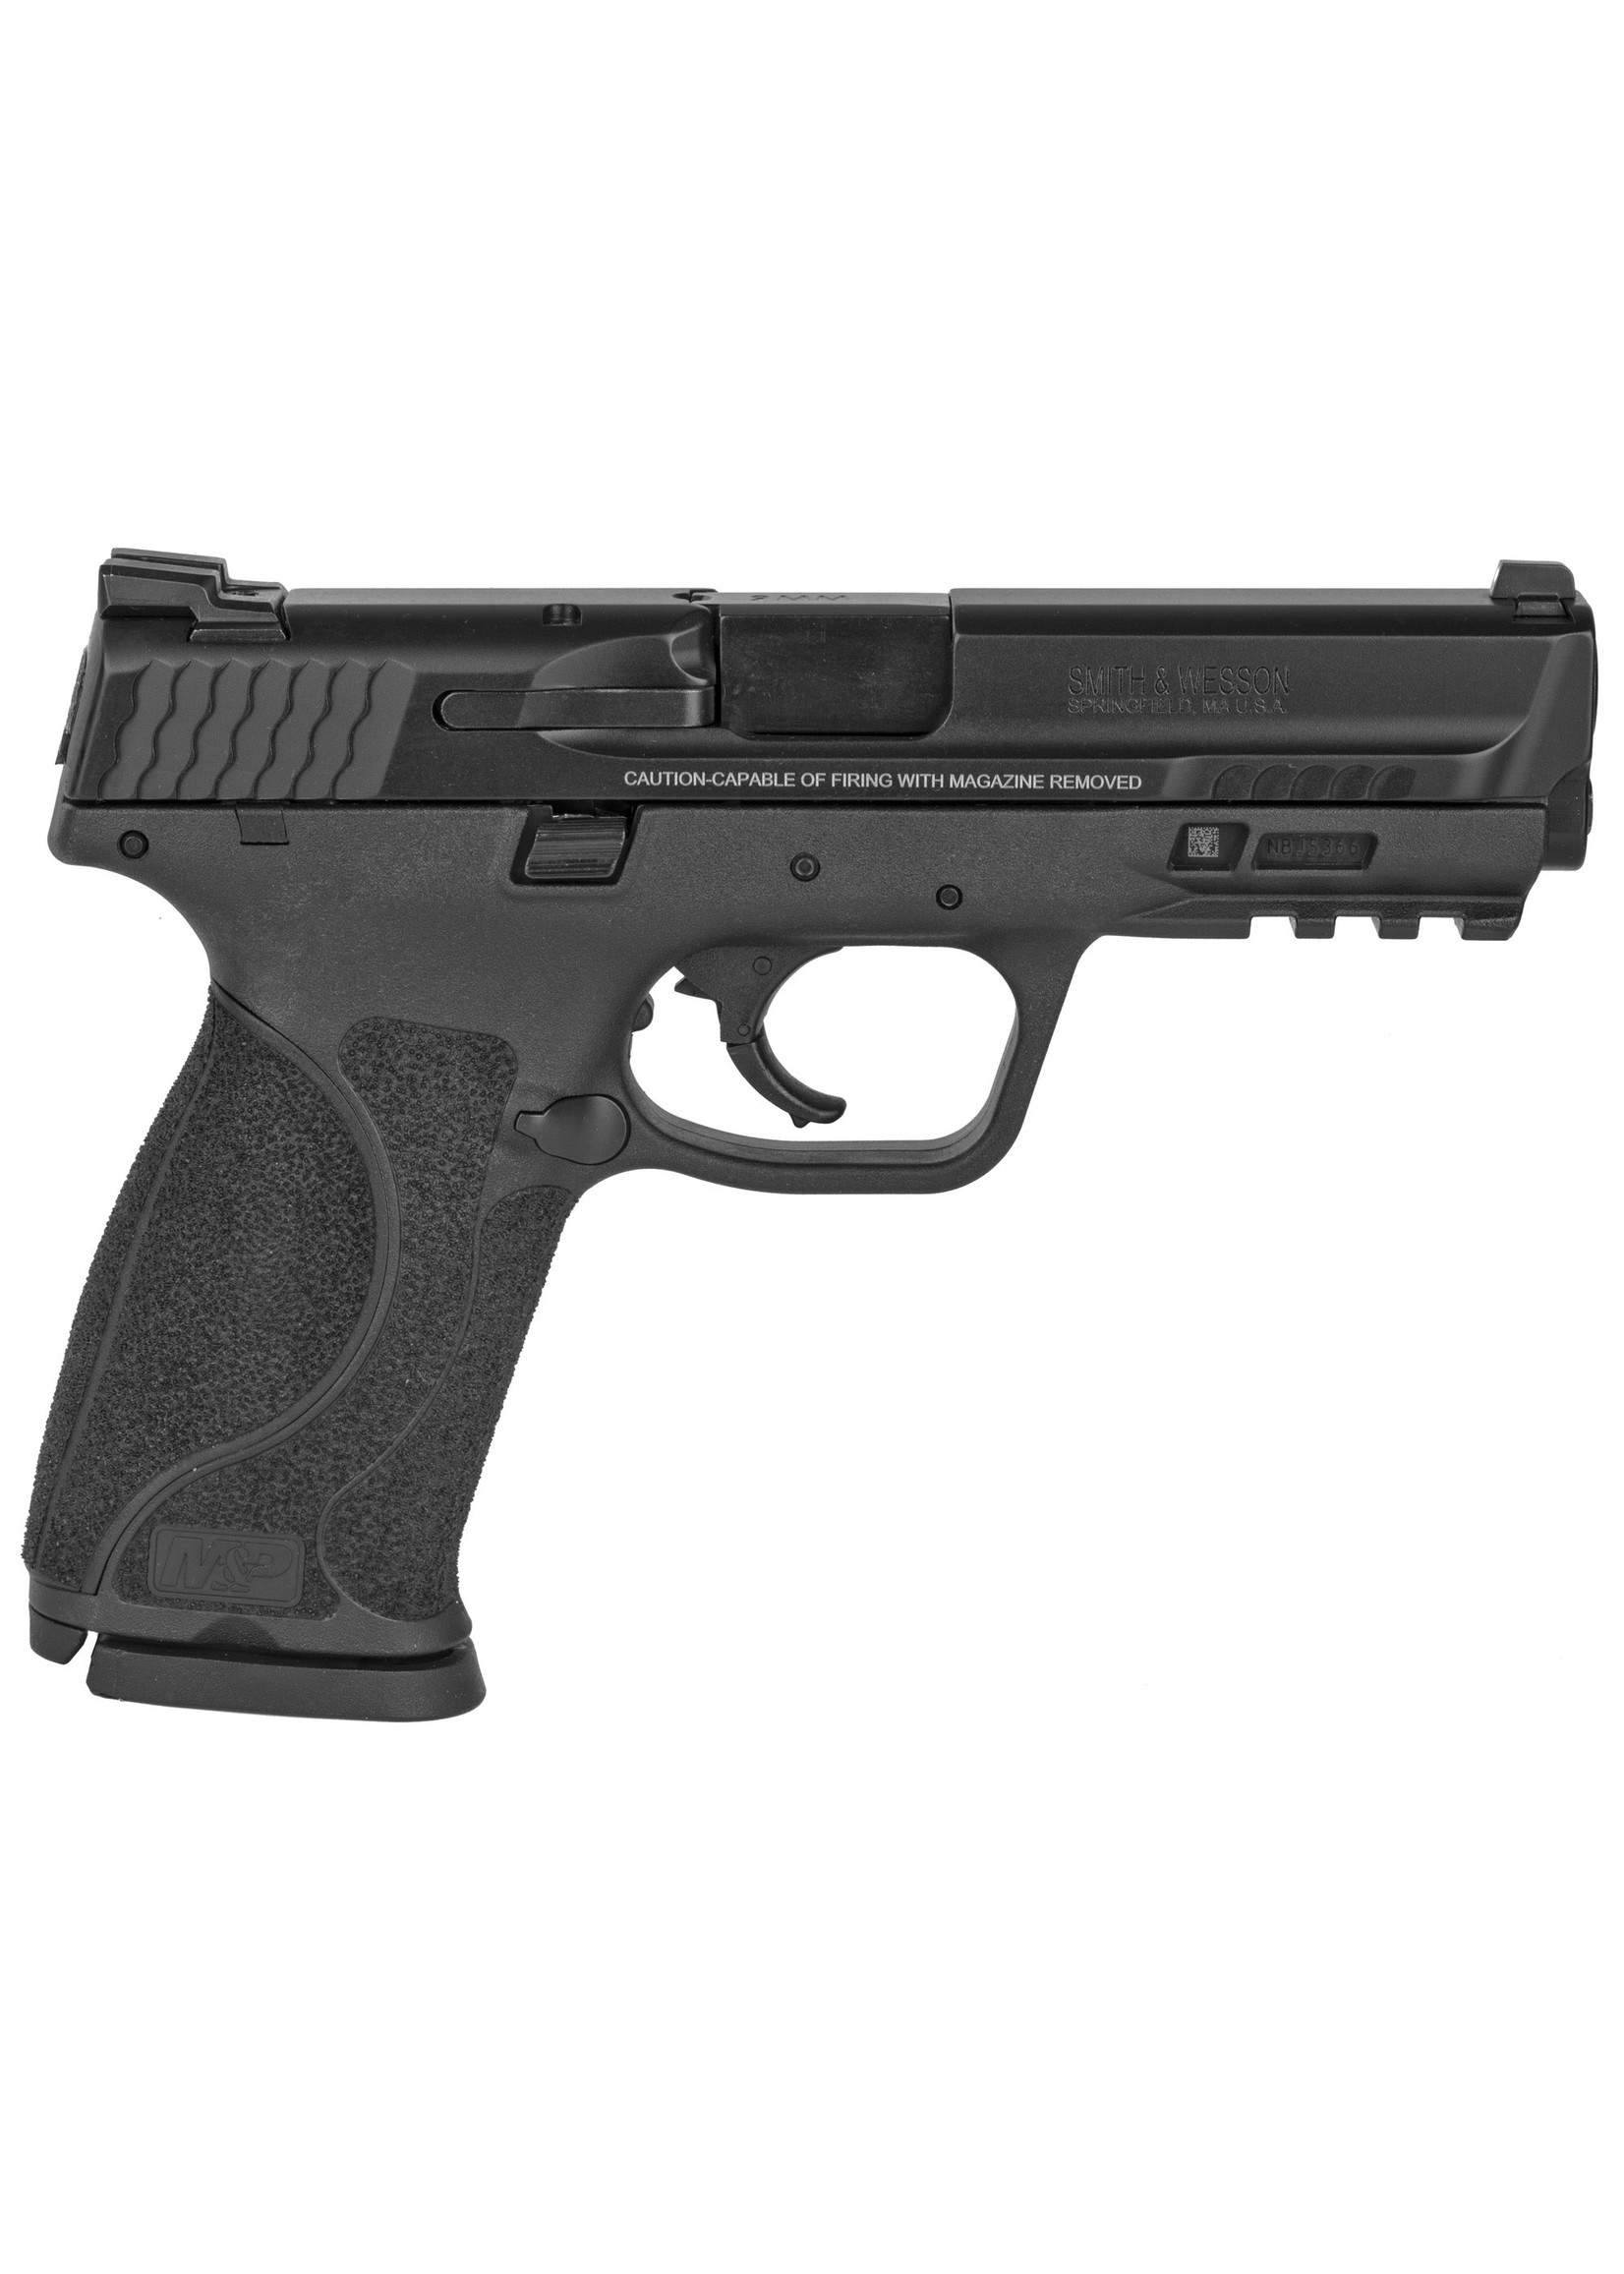 Smith and Wesson (S&W) Smith & Wesson M&P9 M2.0  Pistol, 9mm, 4.25", black, 17+1, No Manual Safety